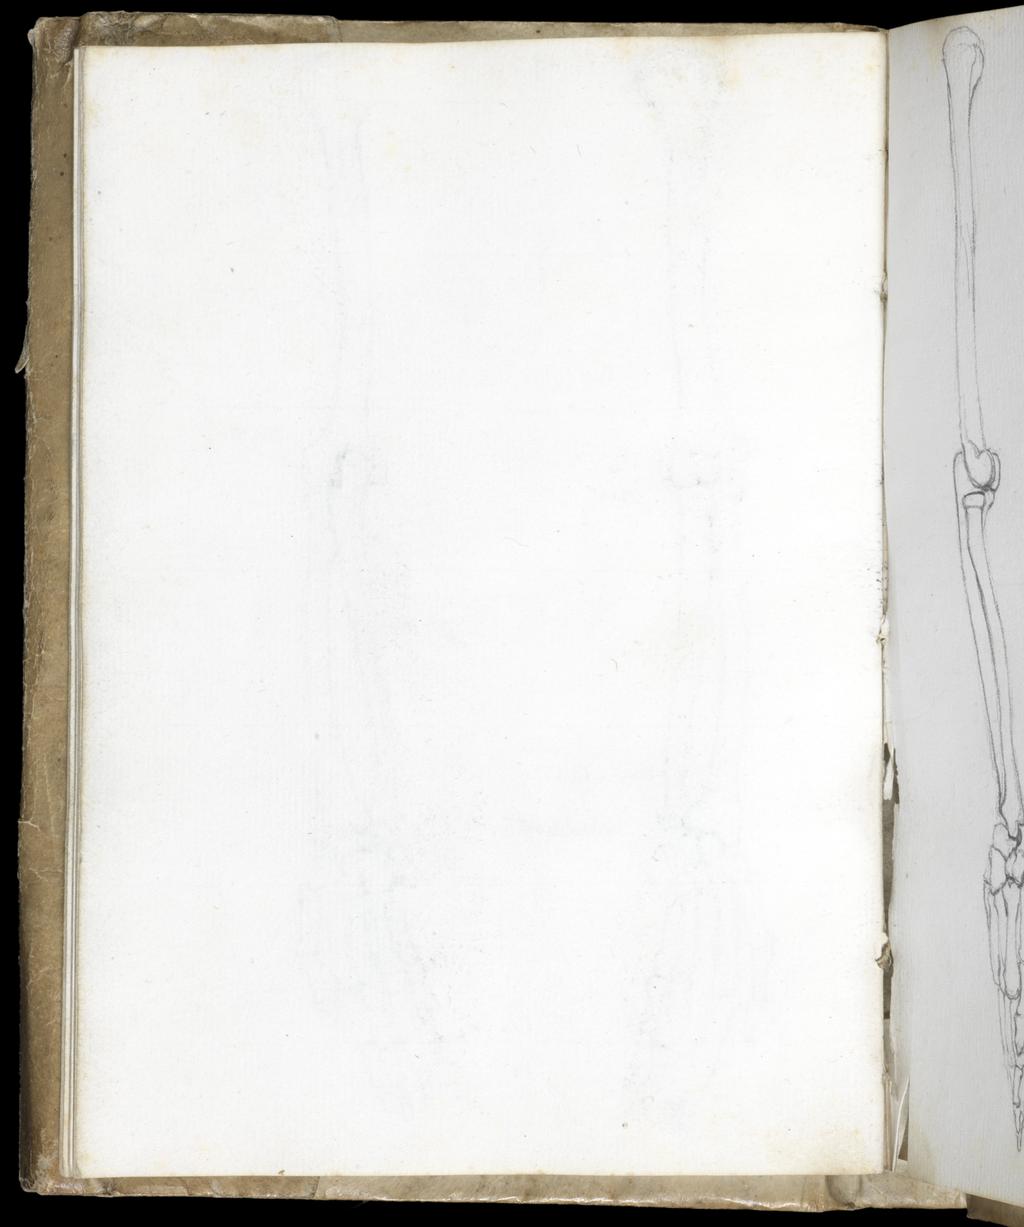 An image of Sketchbook. Flaxman, John (British, 1755-1826). Vellum bound sketchbook containing 28 leaves. Three leaves have been cut out and are loose. Front cover bears traces of graphite (black ink?) illustration, and has a flap which may be closed to protect the edges of the leaves. Many leaves have apparently been removed, including the following: 1 following f.1, 4 following f.12 and 1 following f.16. Cuts on the versos of f.24 and f.25 indicate leaves removed following f.25.